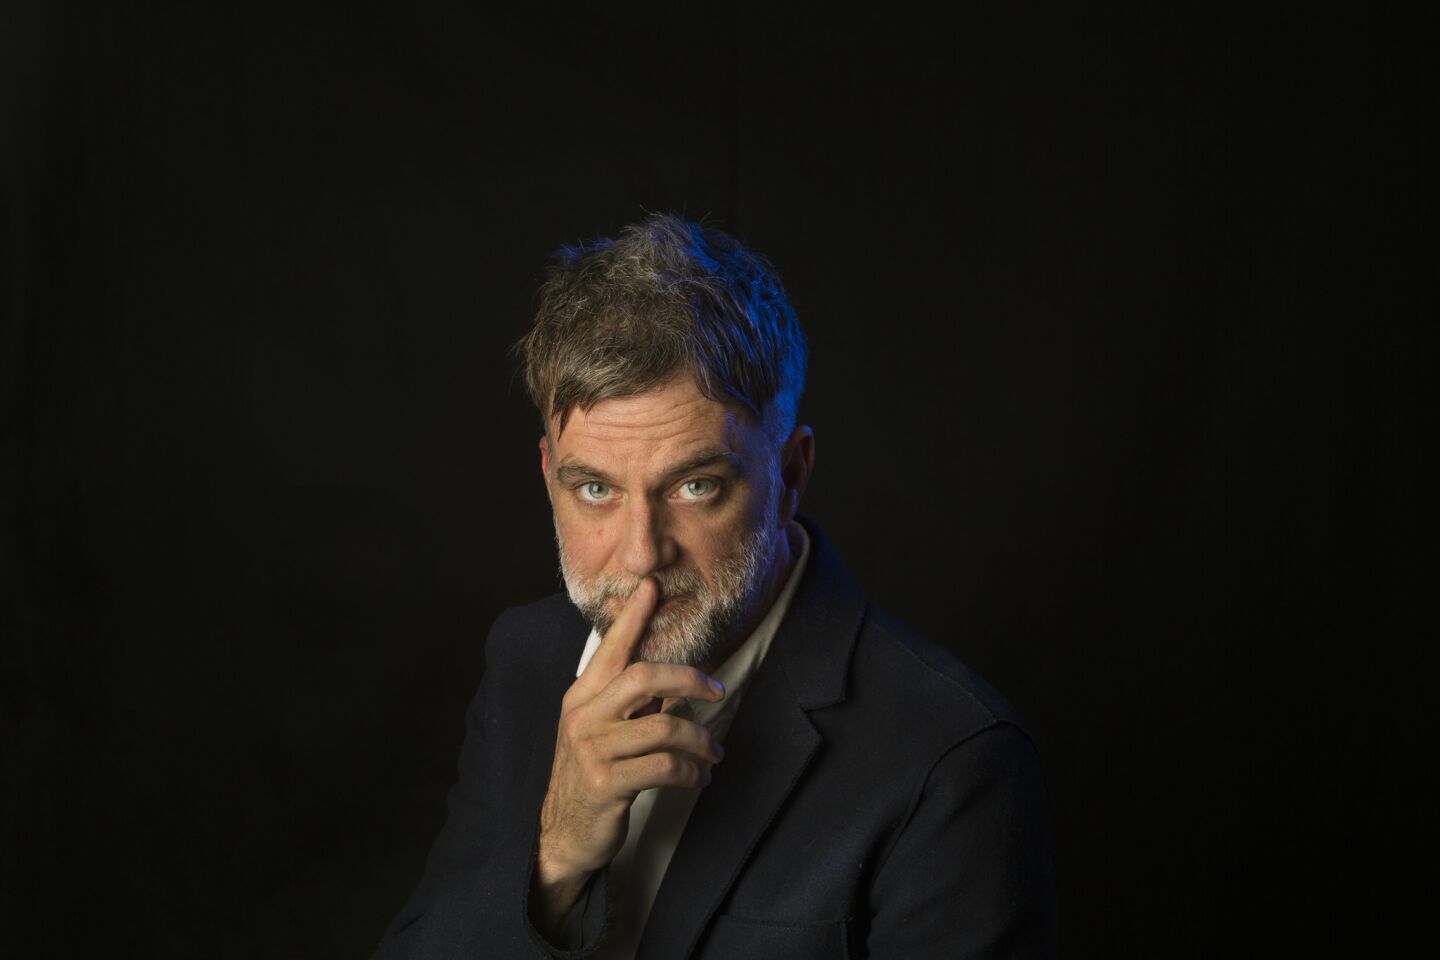 Celebrity portraits by The Times | Paul Thomas Anderson